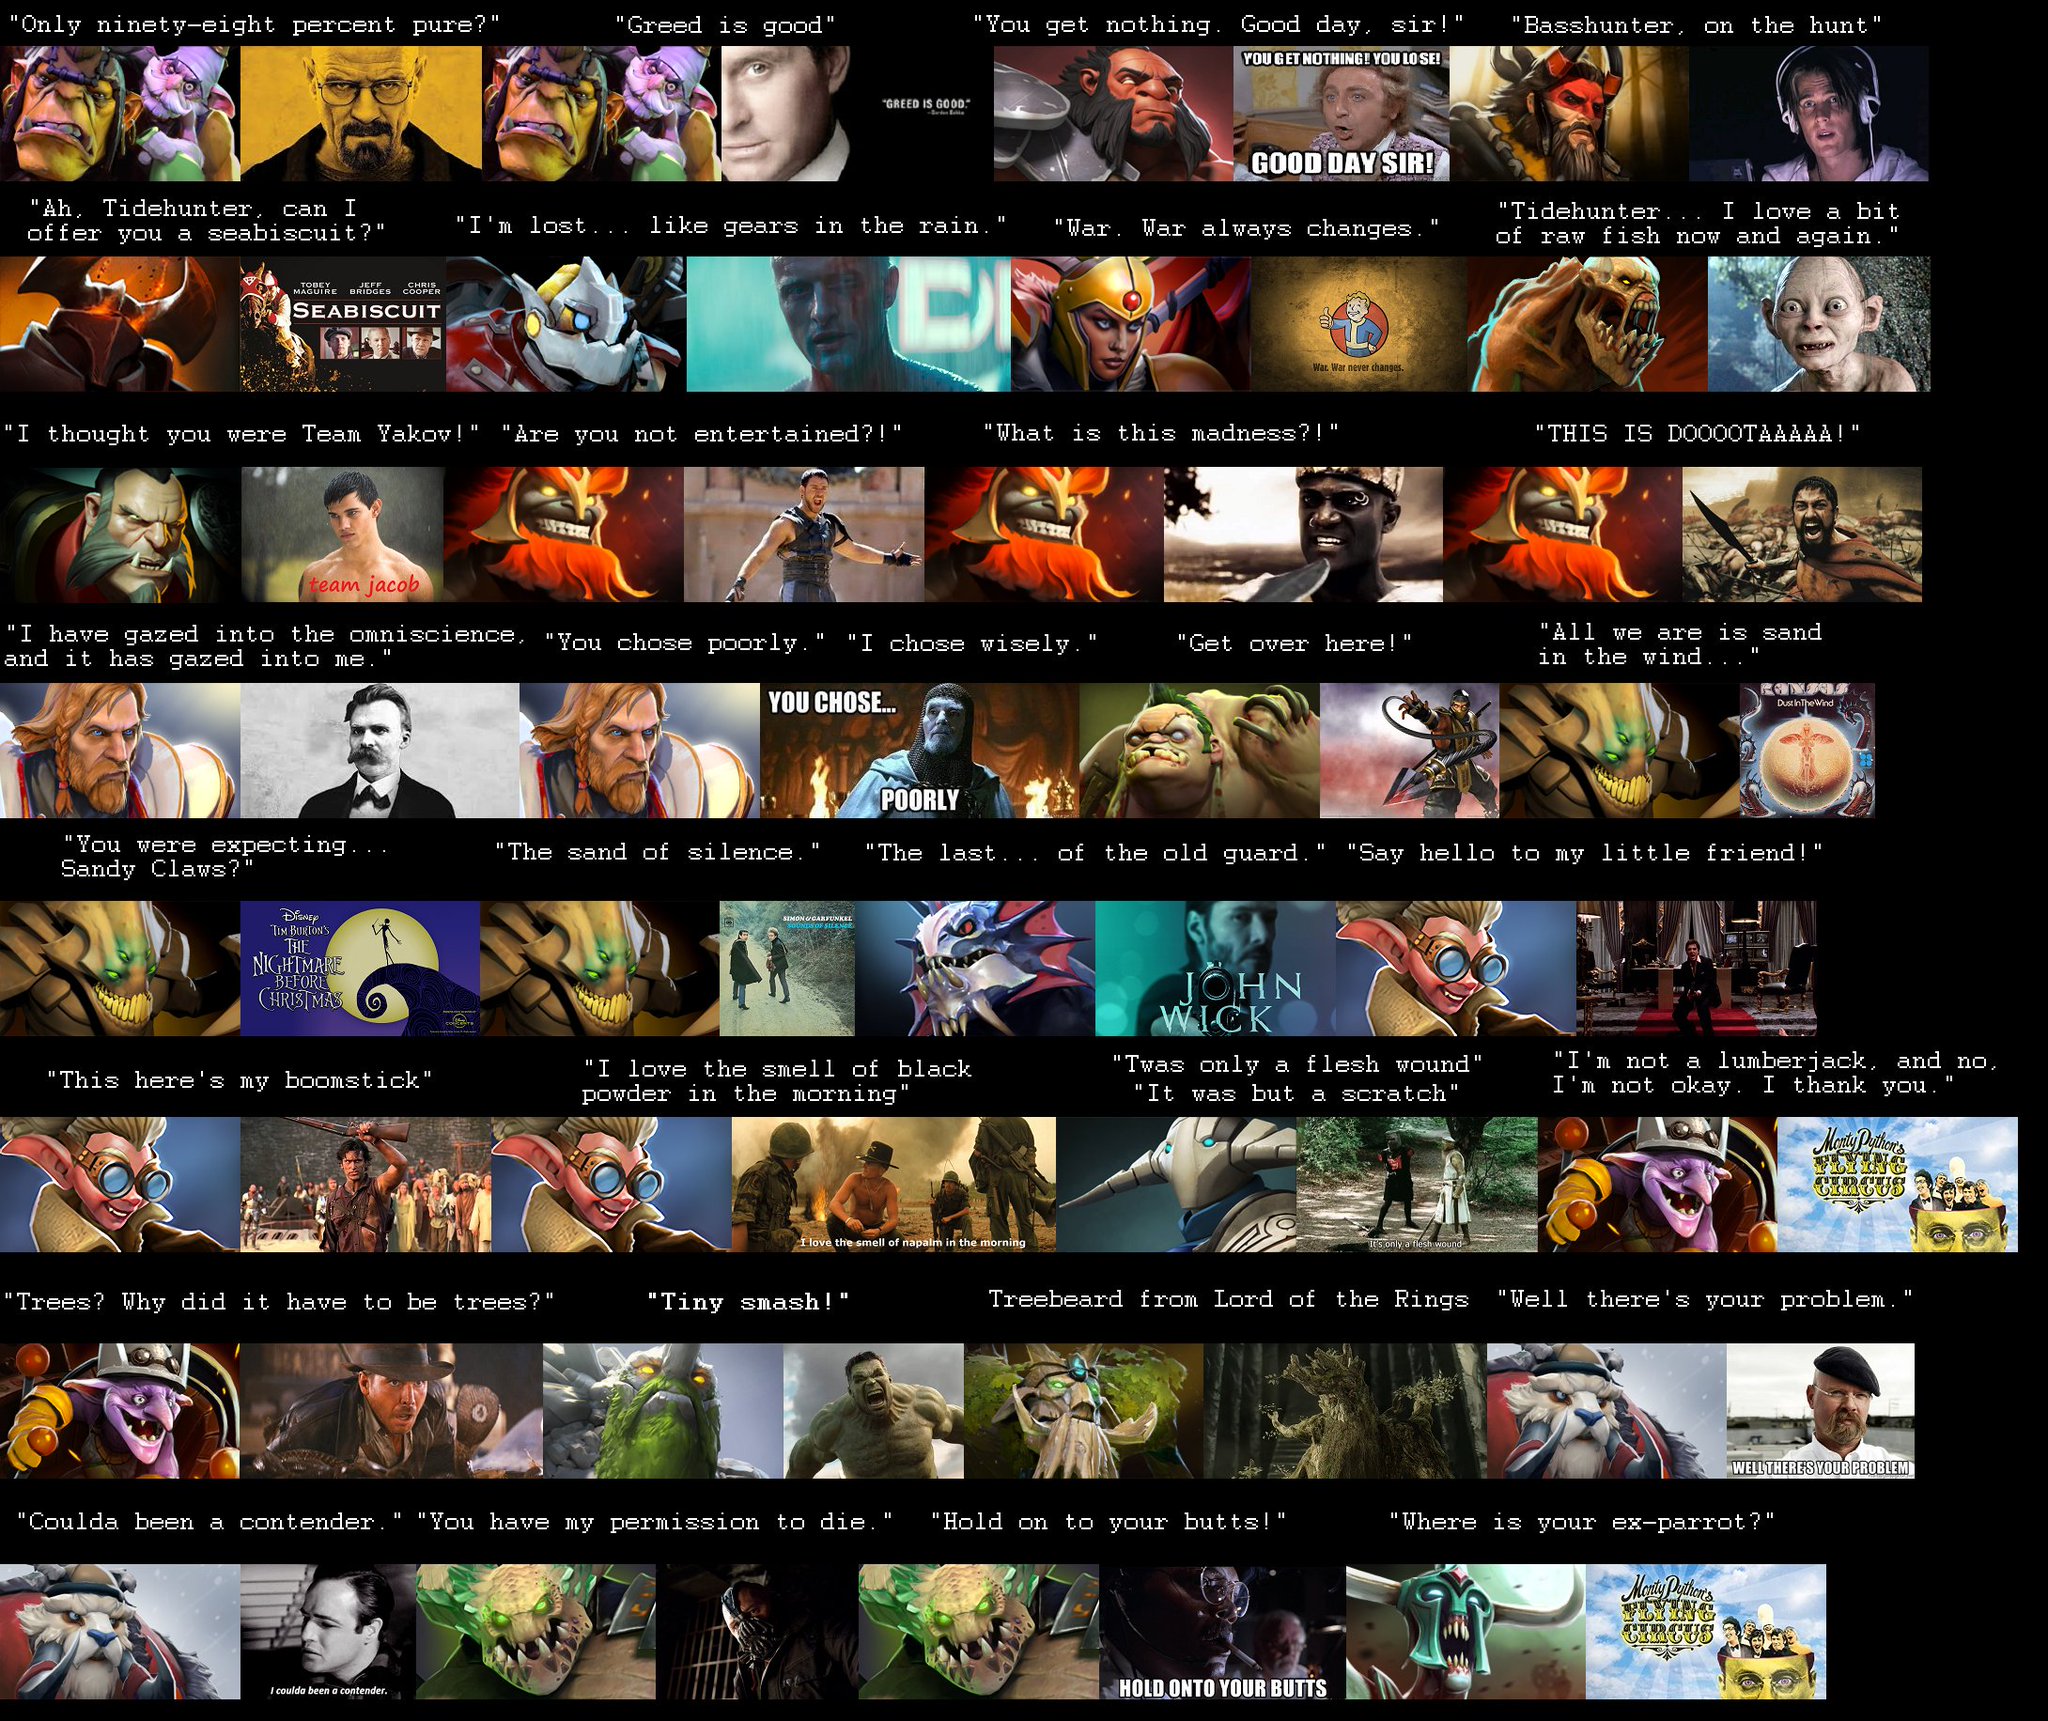 Reddit Dota 2 On Twitter I Made A Collage Of Several Pop Culture